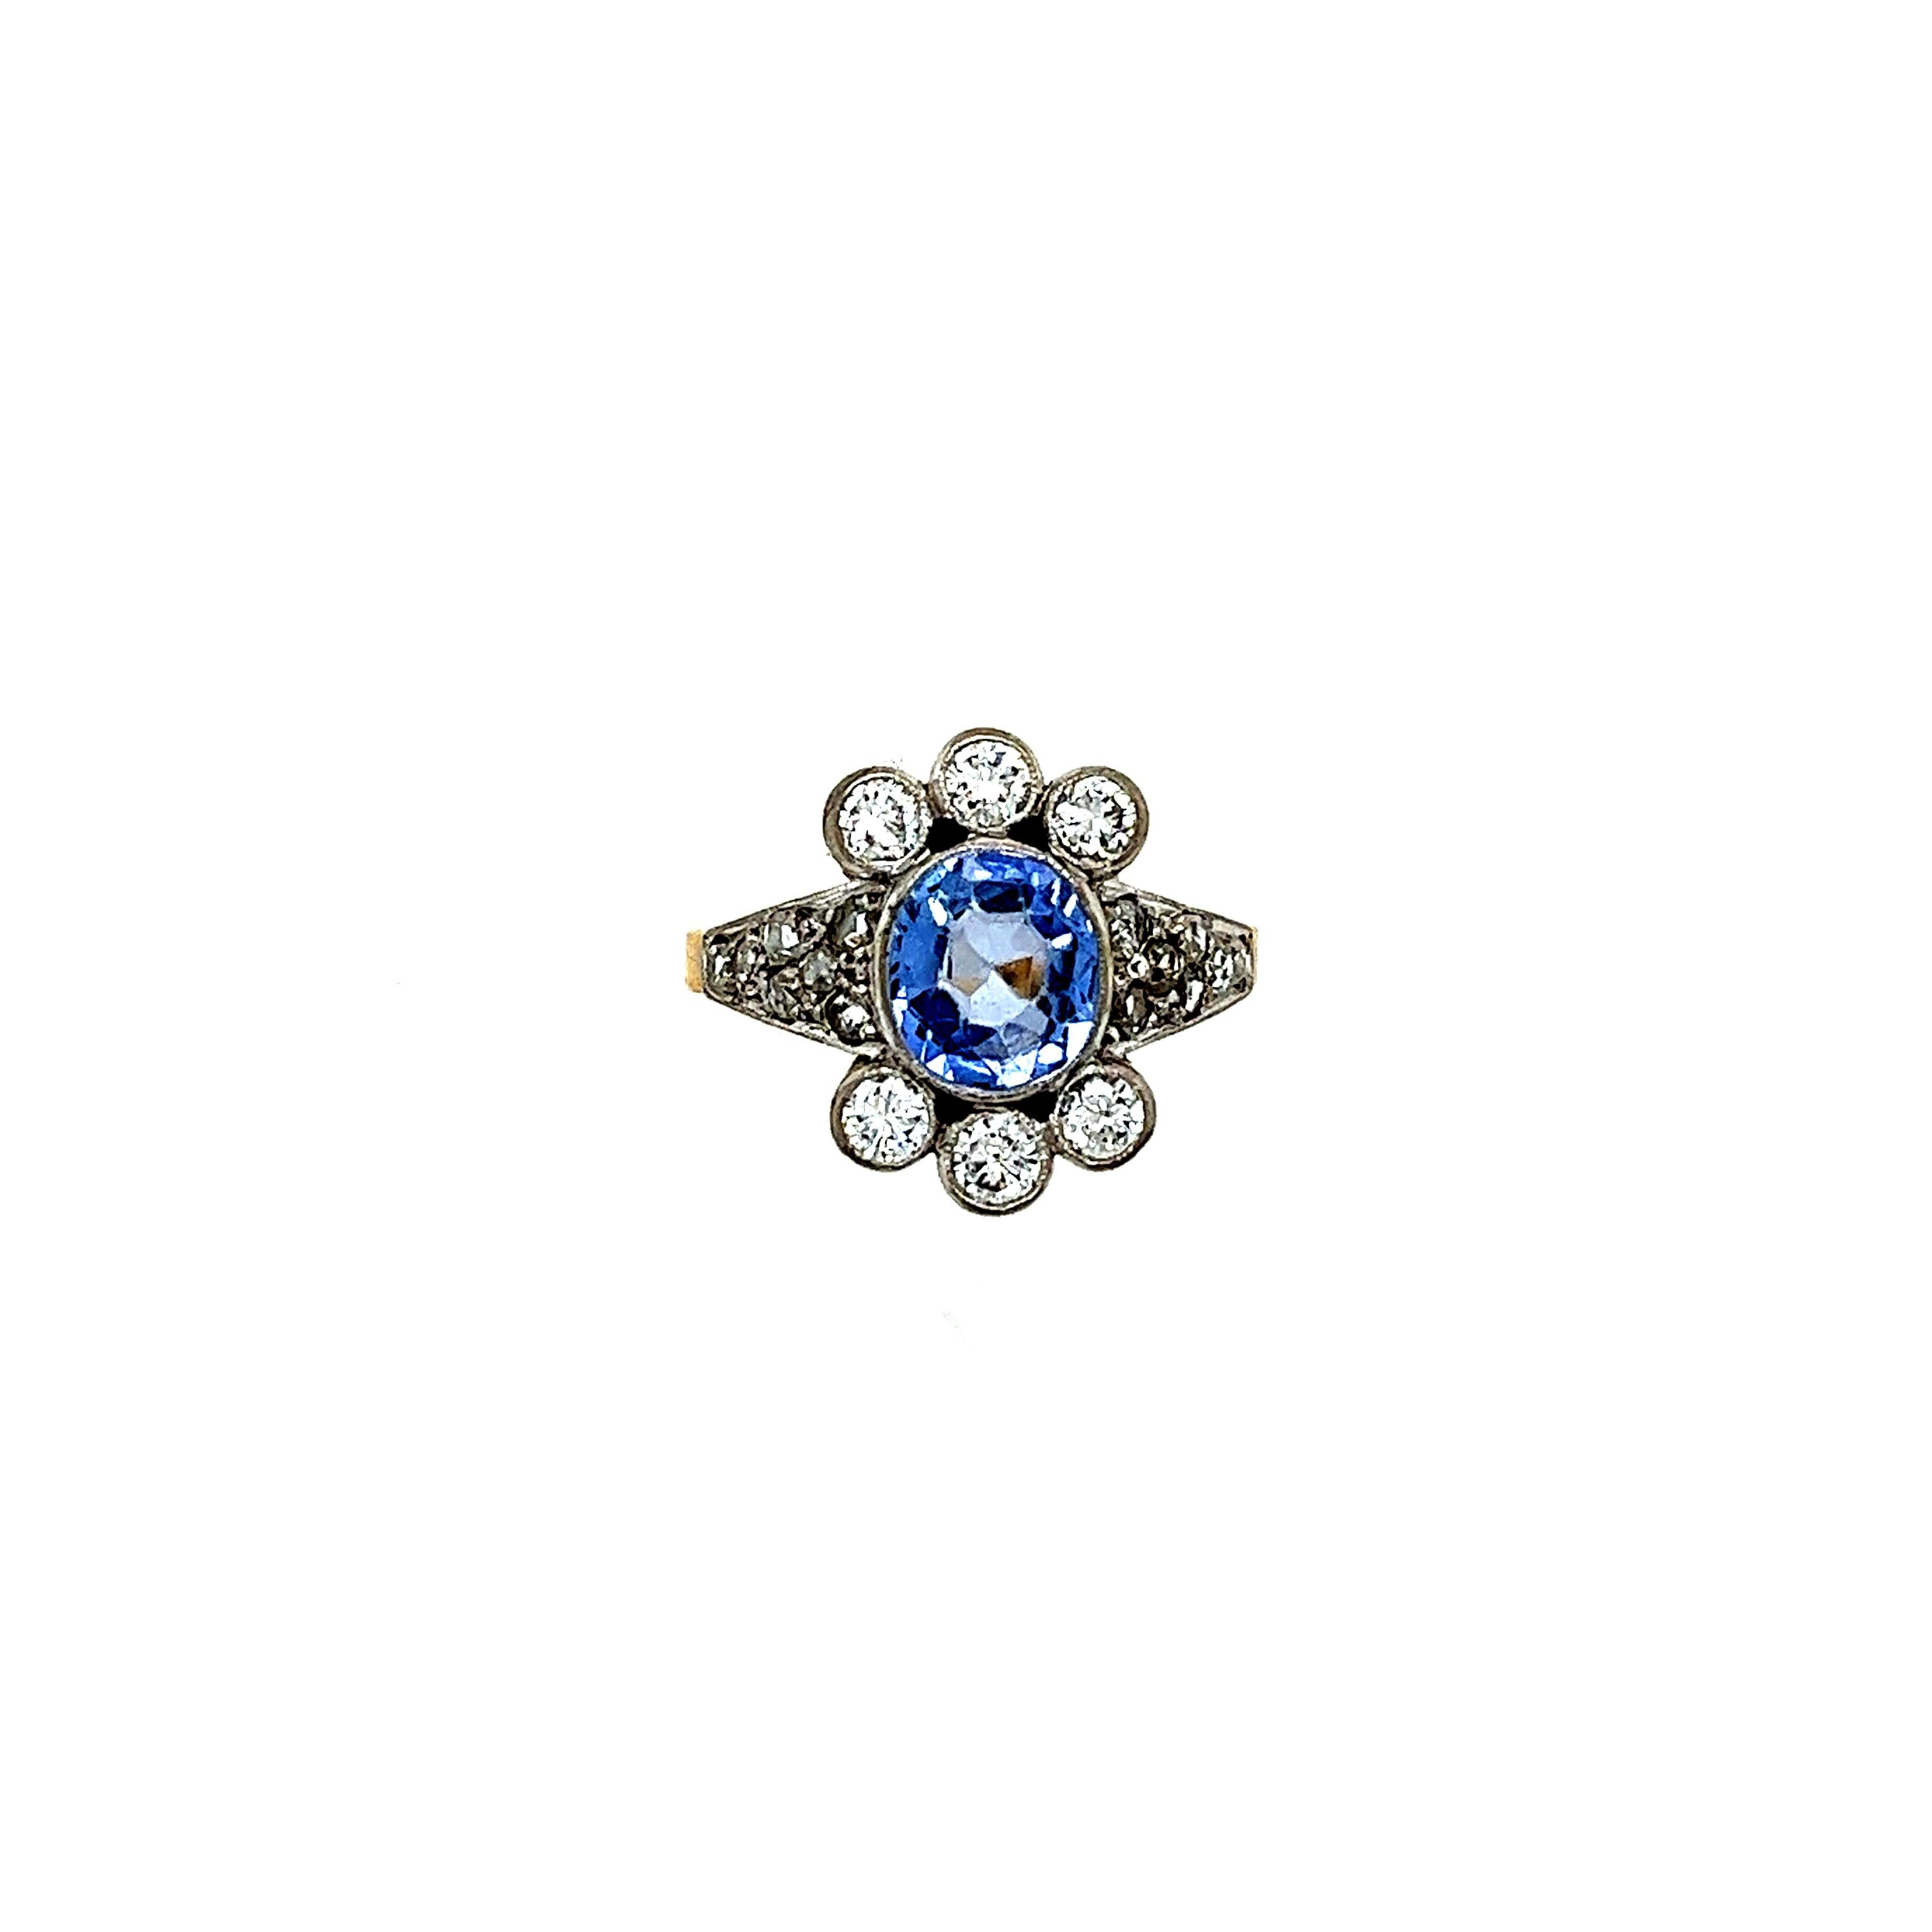 A Sapphire And Diamond Cluster Ring, with an oval Ceylon sapphire bezel set in 18ct white on yellow gold surrounded by 6 round brilliant cut diamonds and with 14 rose cut diamonds pavé set on the shoulders on a 2.2mm band.

Sapphire 1.80ct